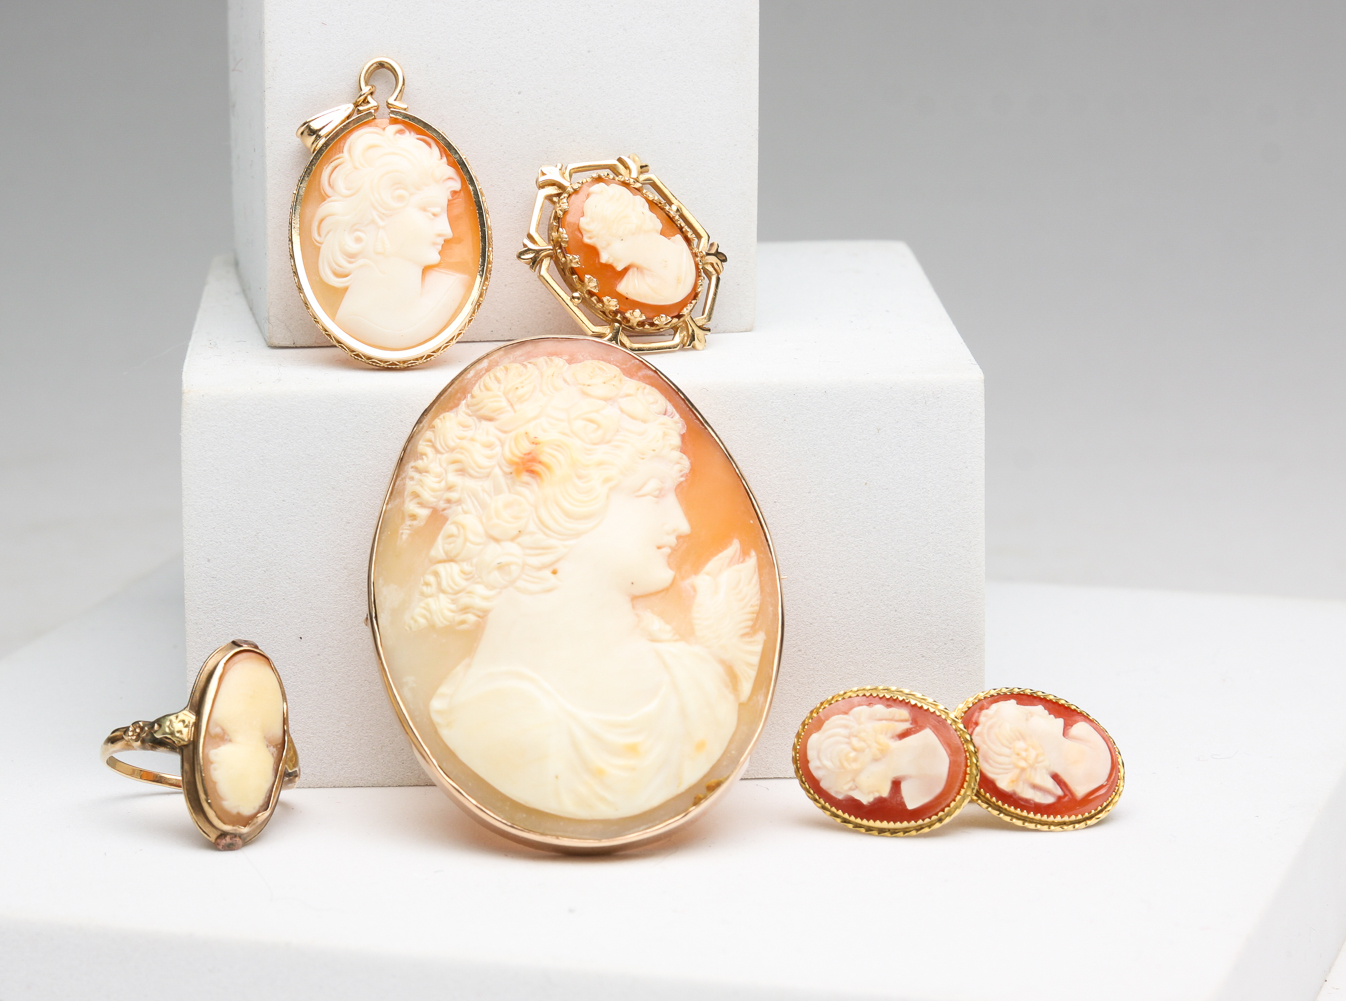 GROUP OF GOLD CAMEO JEWELRY. Late